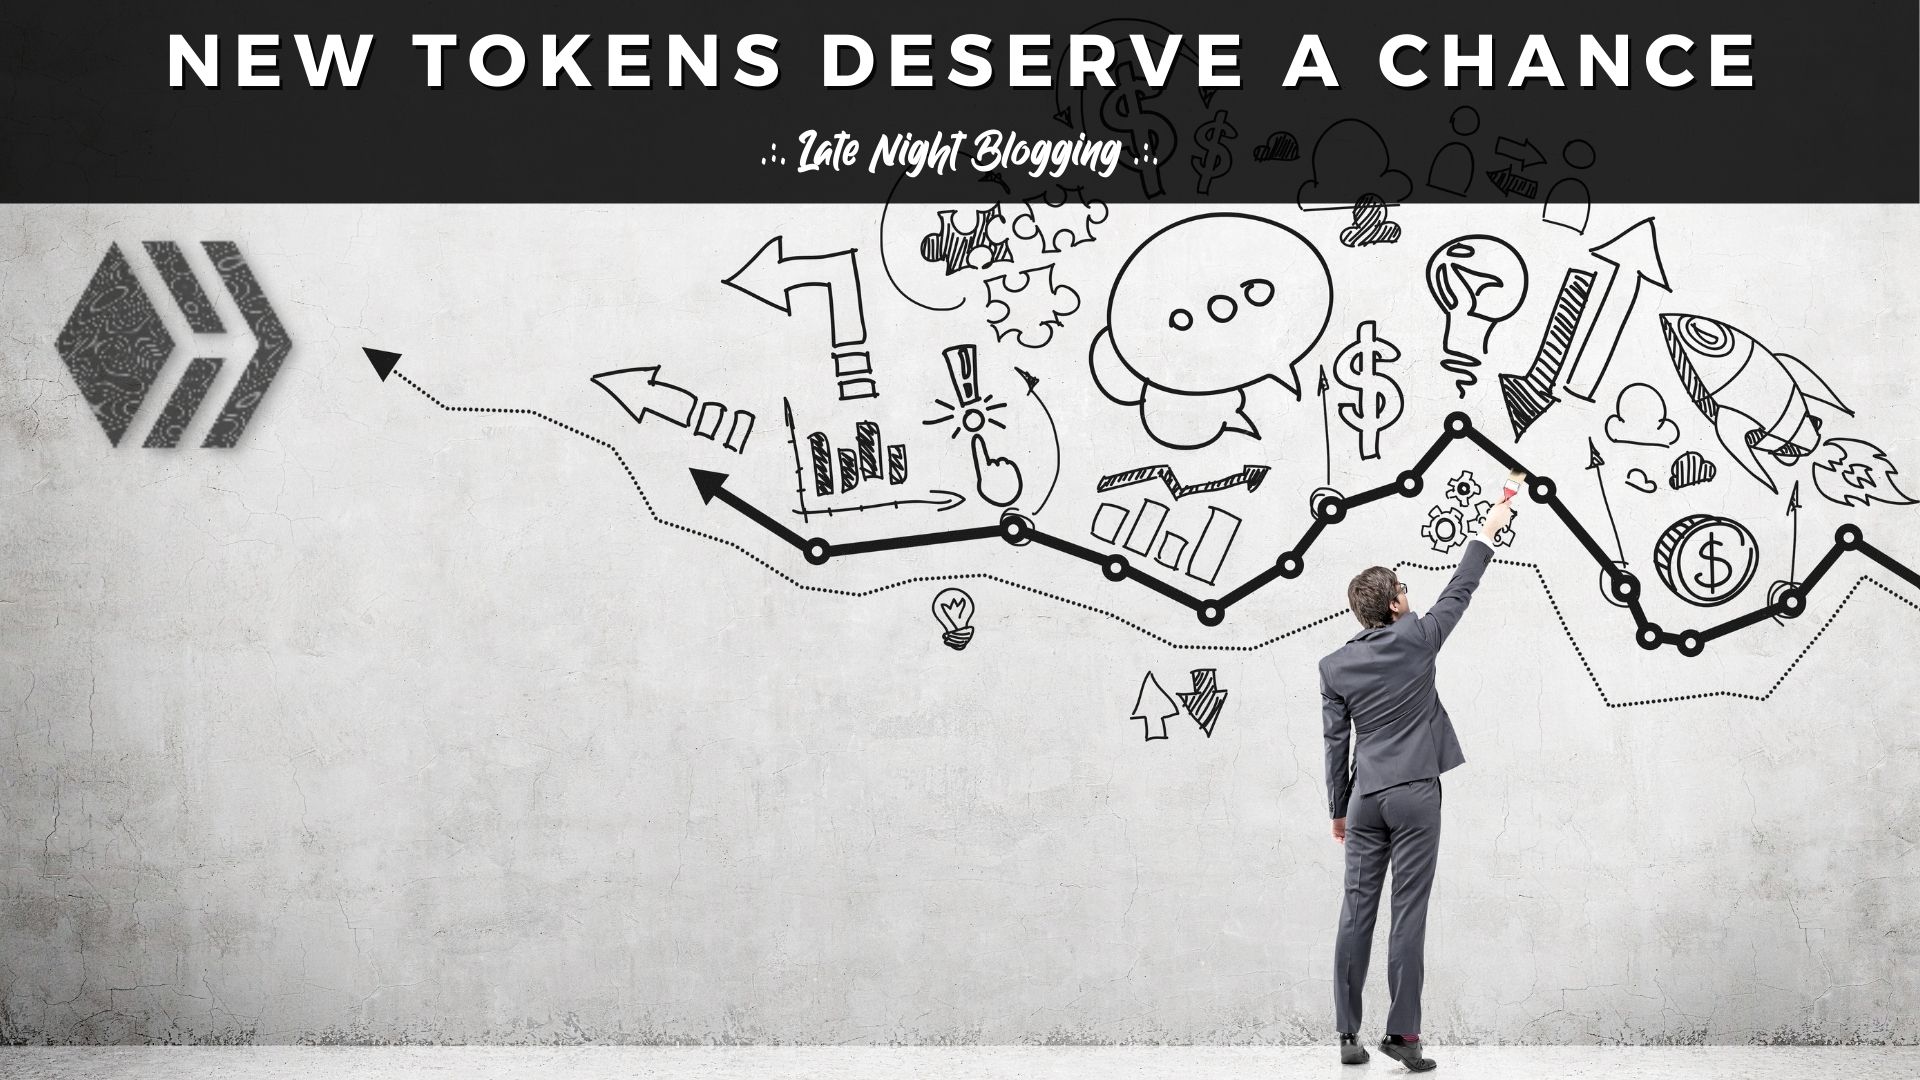 @ph1102/new-tokens-deserve-a-chance-late-night-blogging